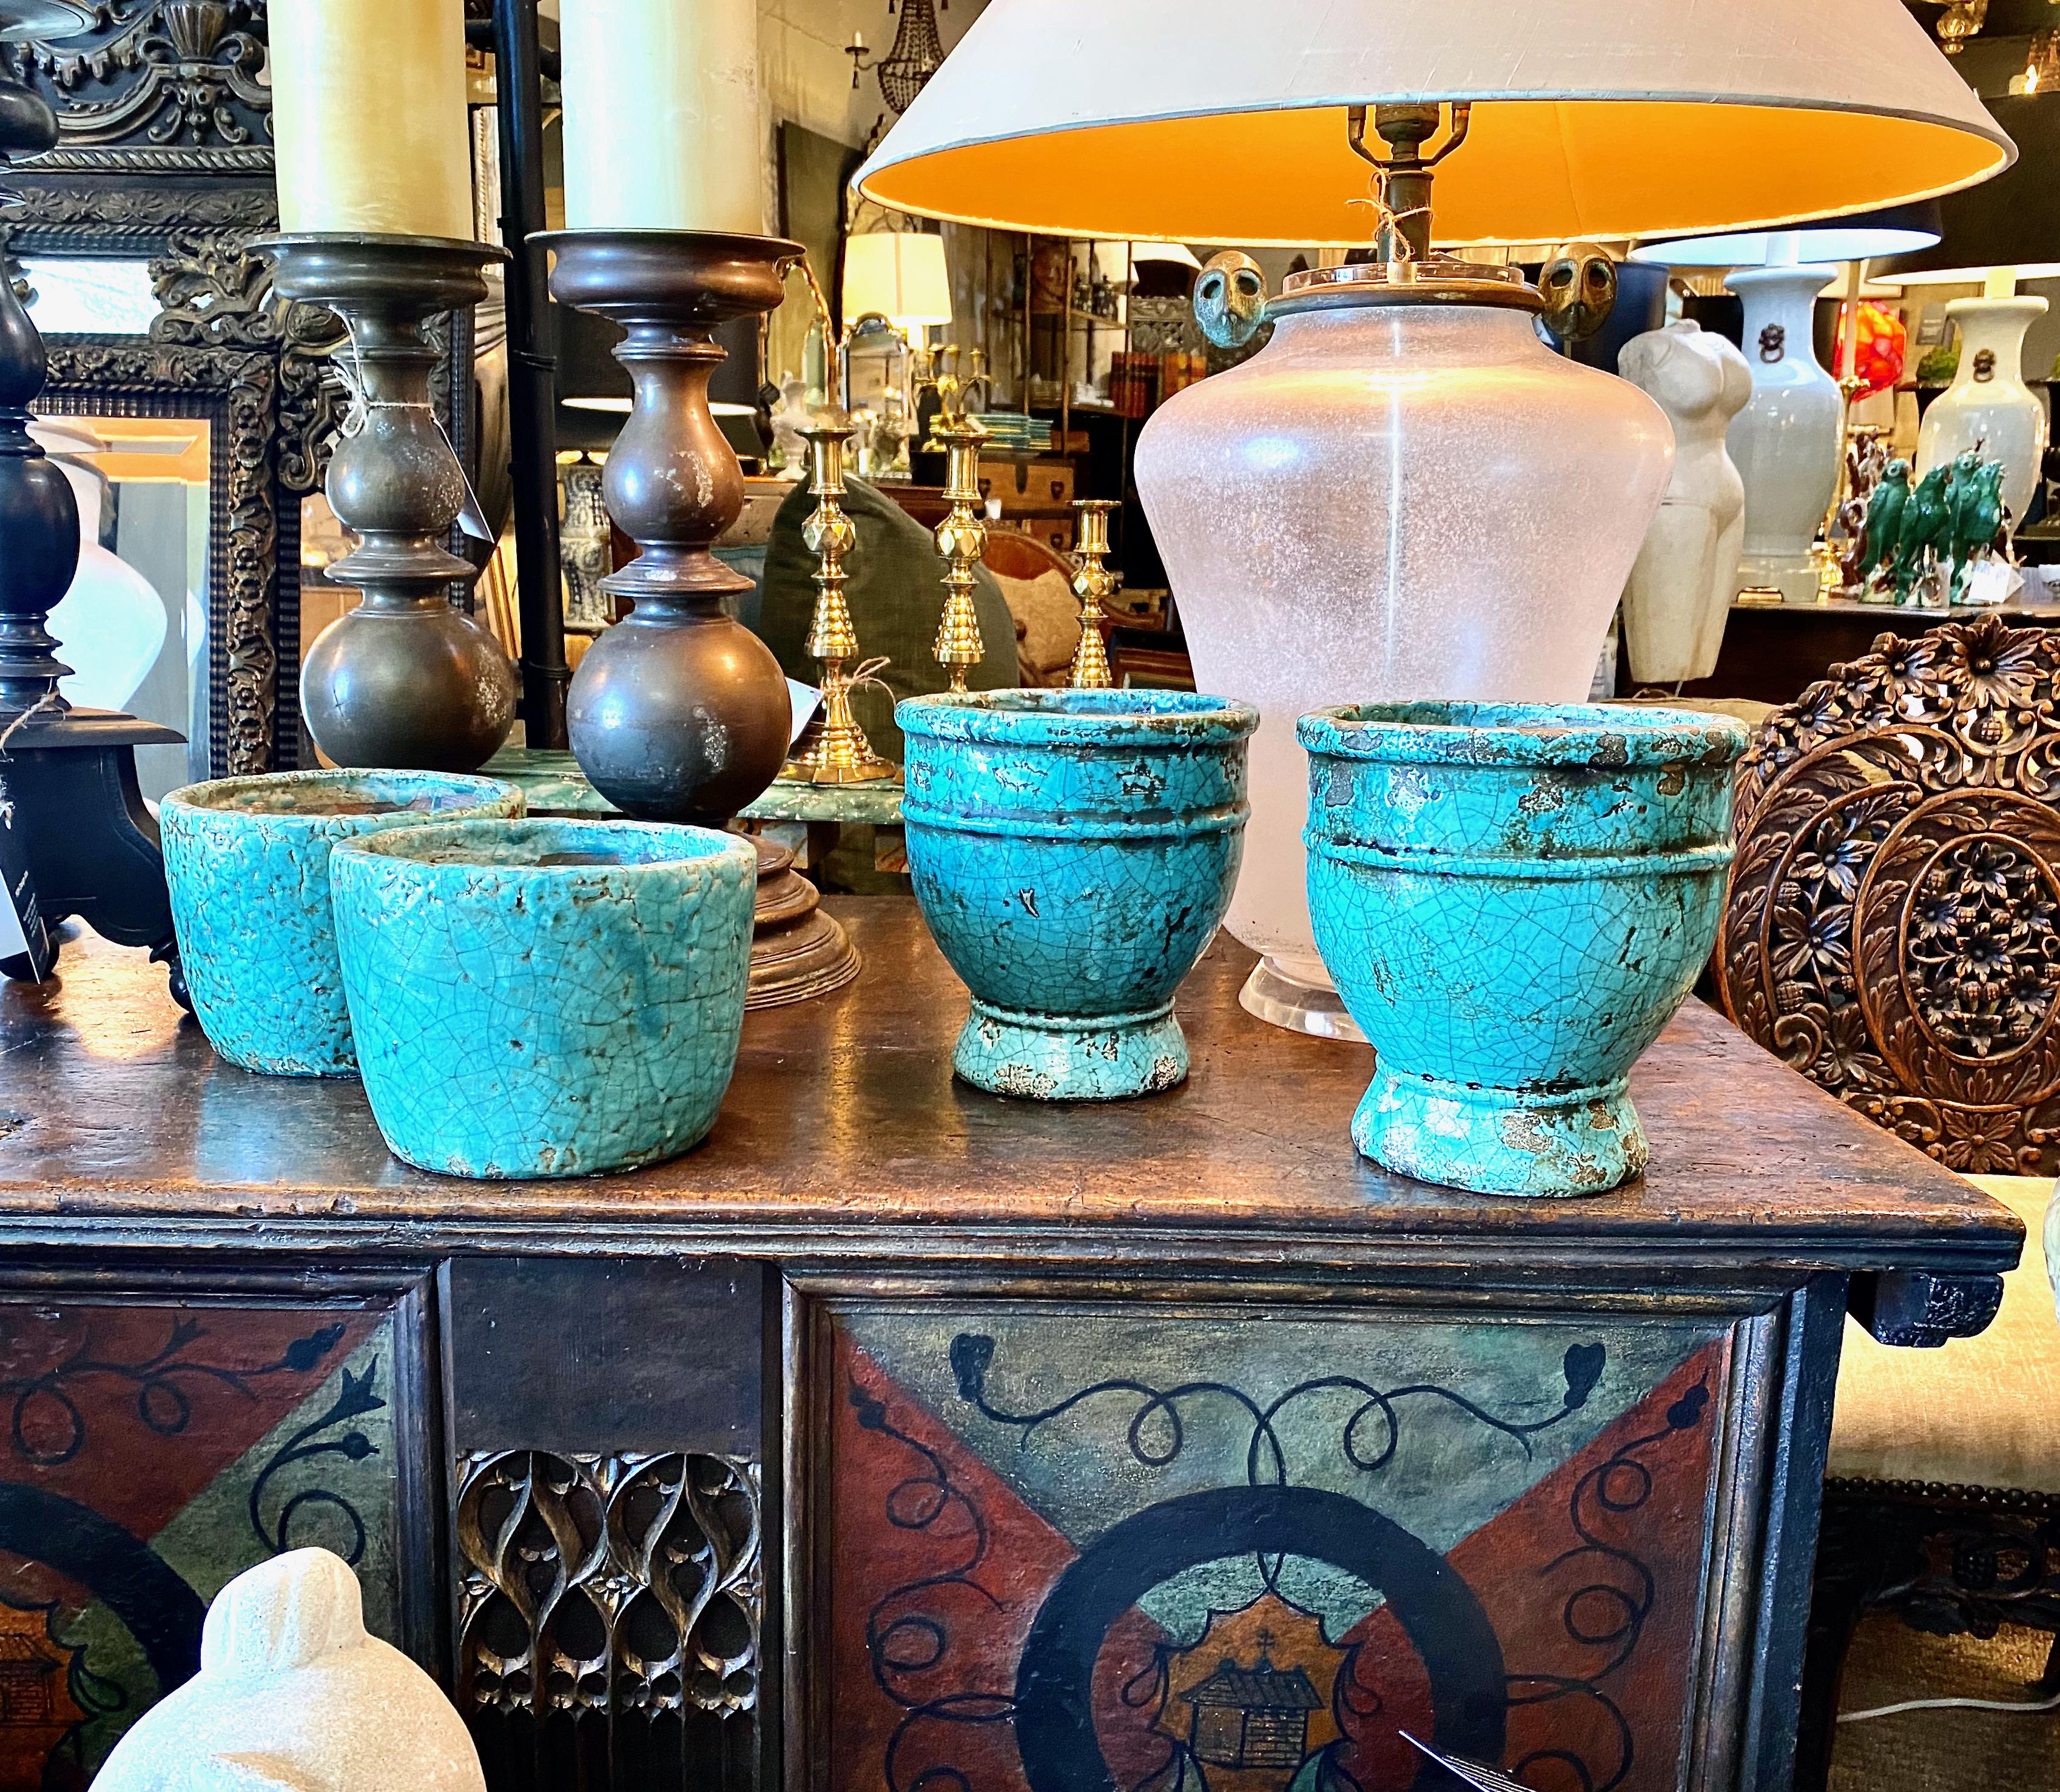 This a very decorative pair of antique turquoise glazed terracotta pots. The pots were acquired from a Michael Smith-designed estate and are striking in their bold color and intense crackle glaze. The size and striking coloration make these the